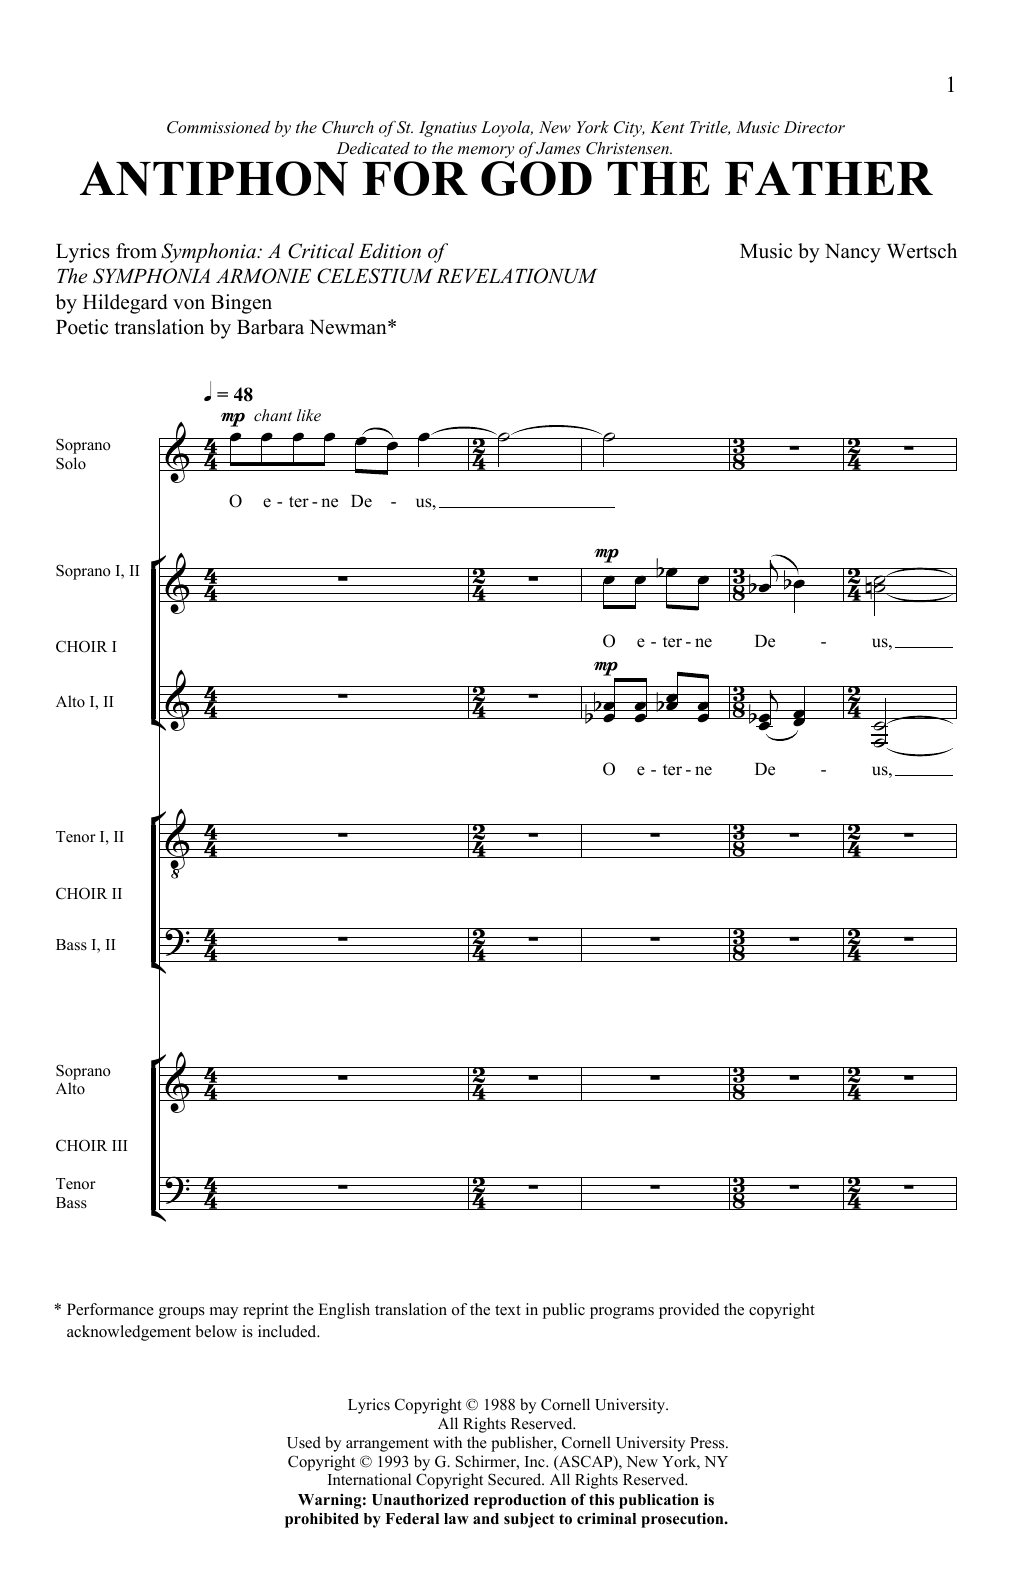 Download Nancy Wertsch Antiphon For God The Father Sheet Music